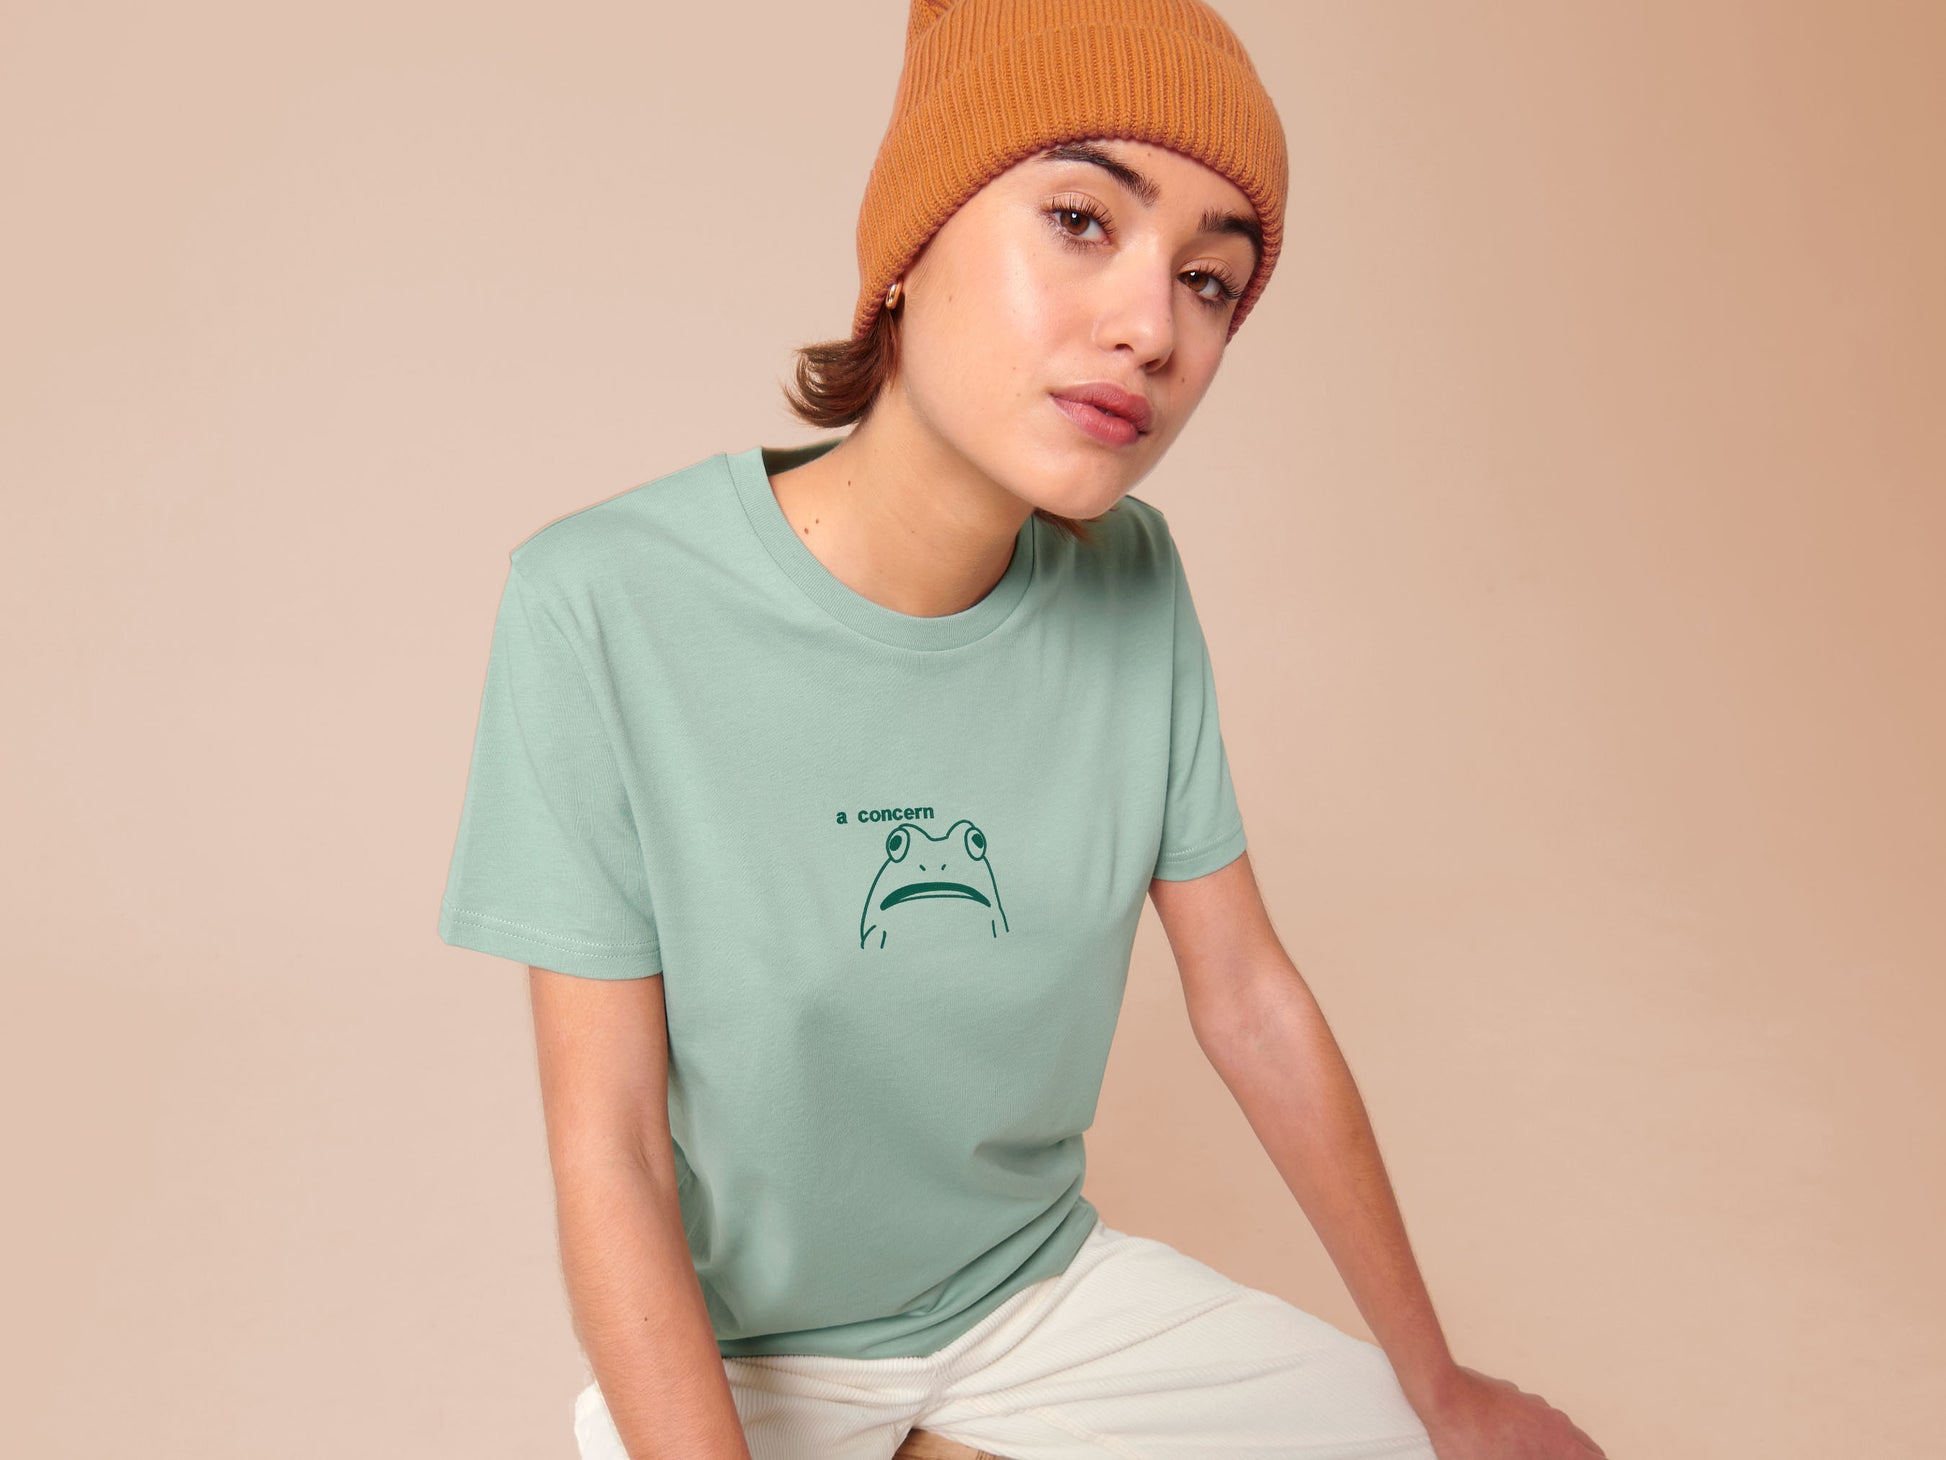 A woman sits wearing a green crew neck short sleeve t-shirt, with an embroidered green thread design of cute confused looking frog with the text a concern.